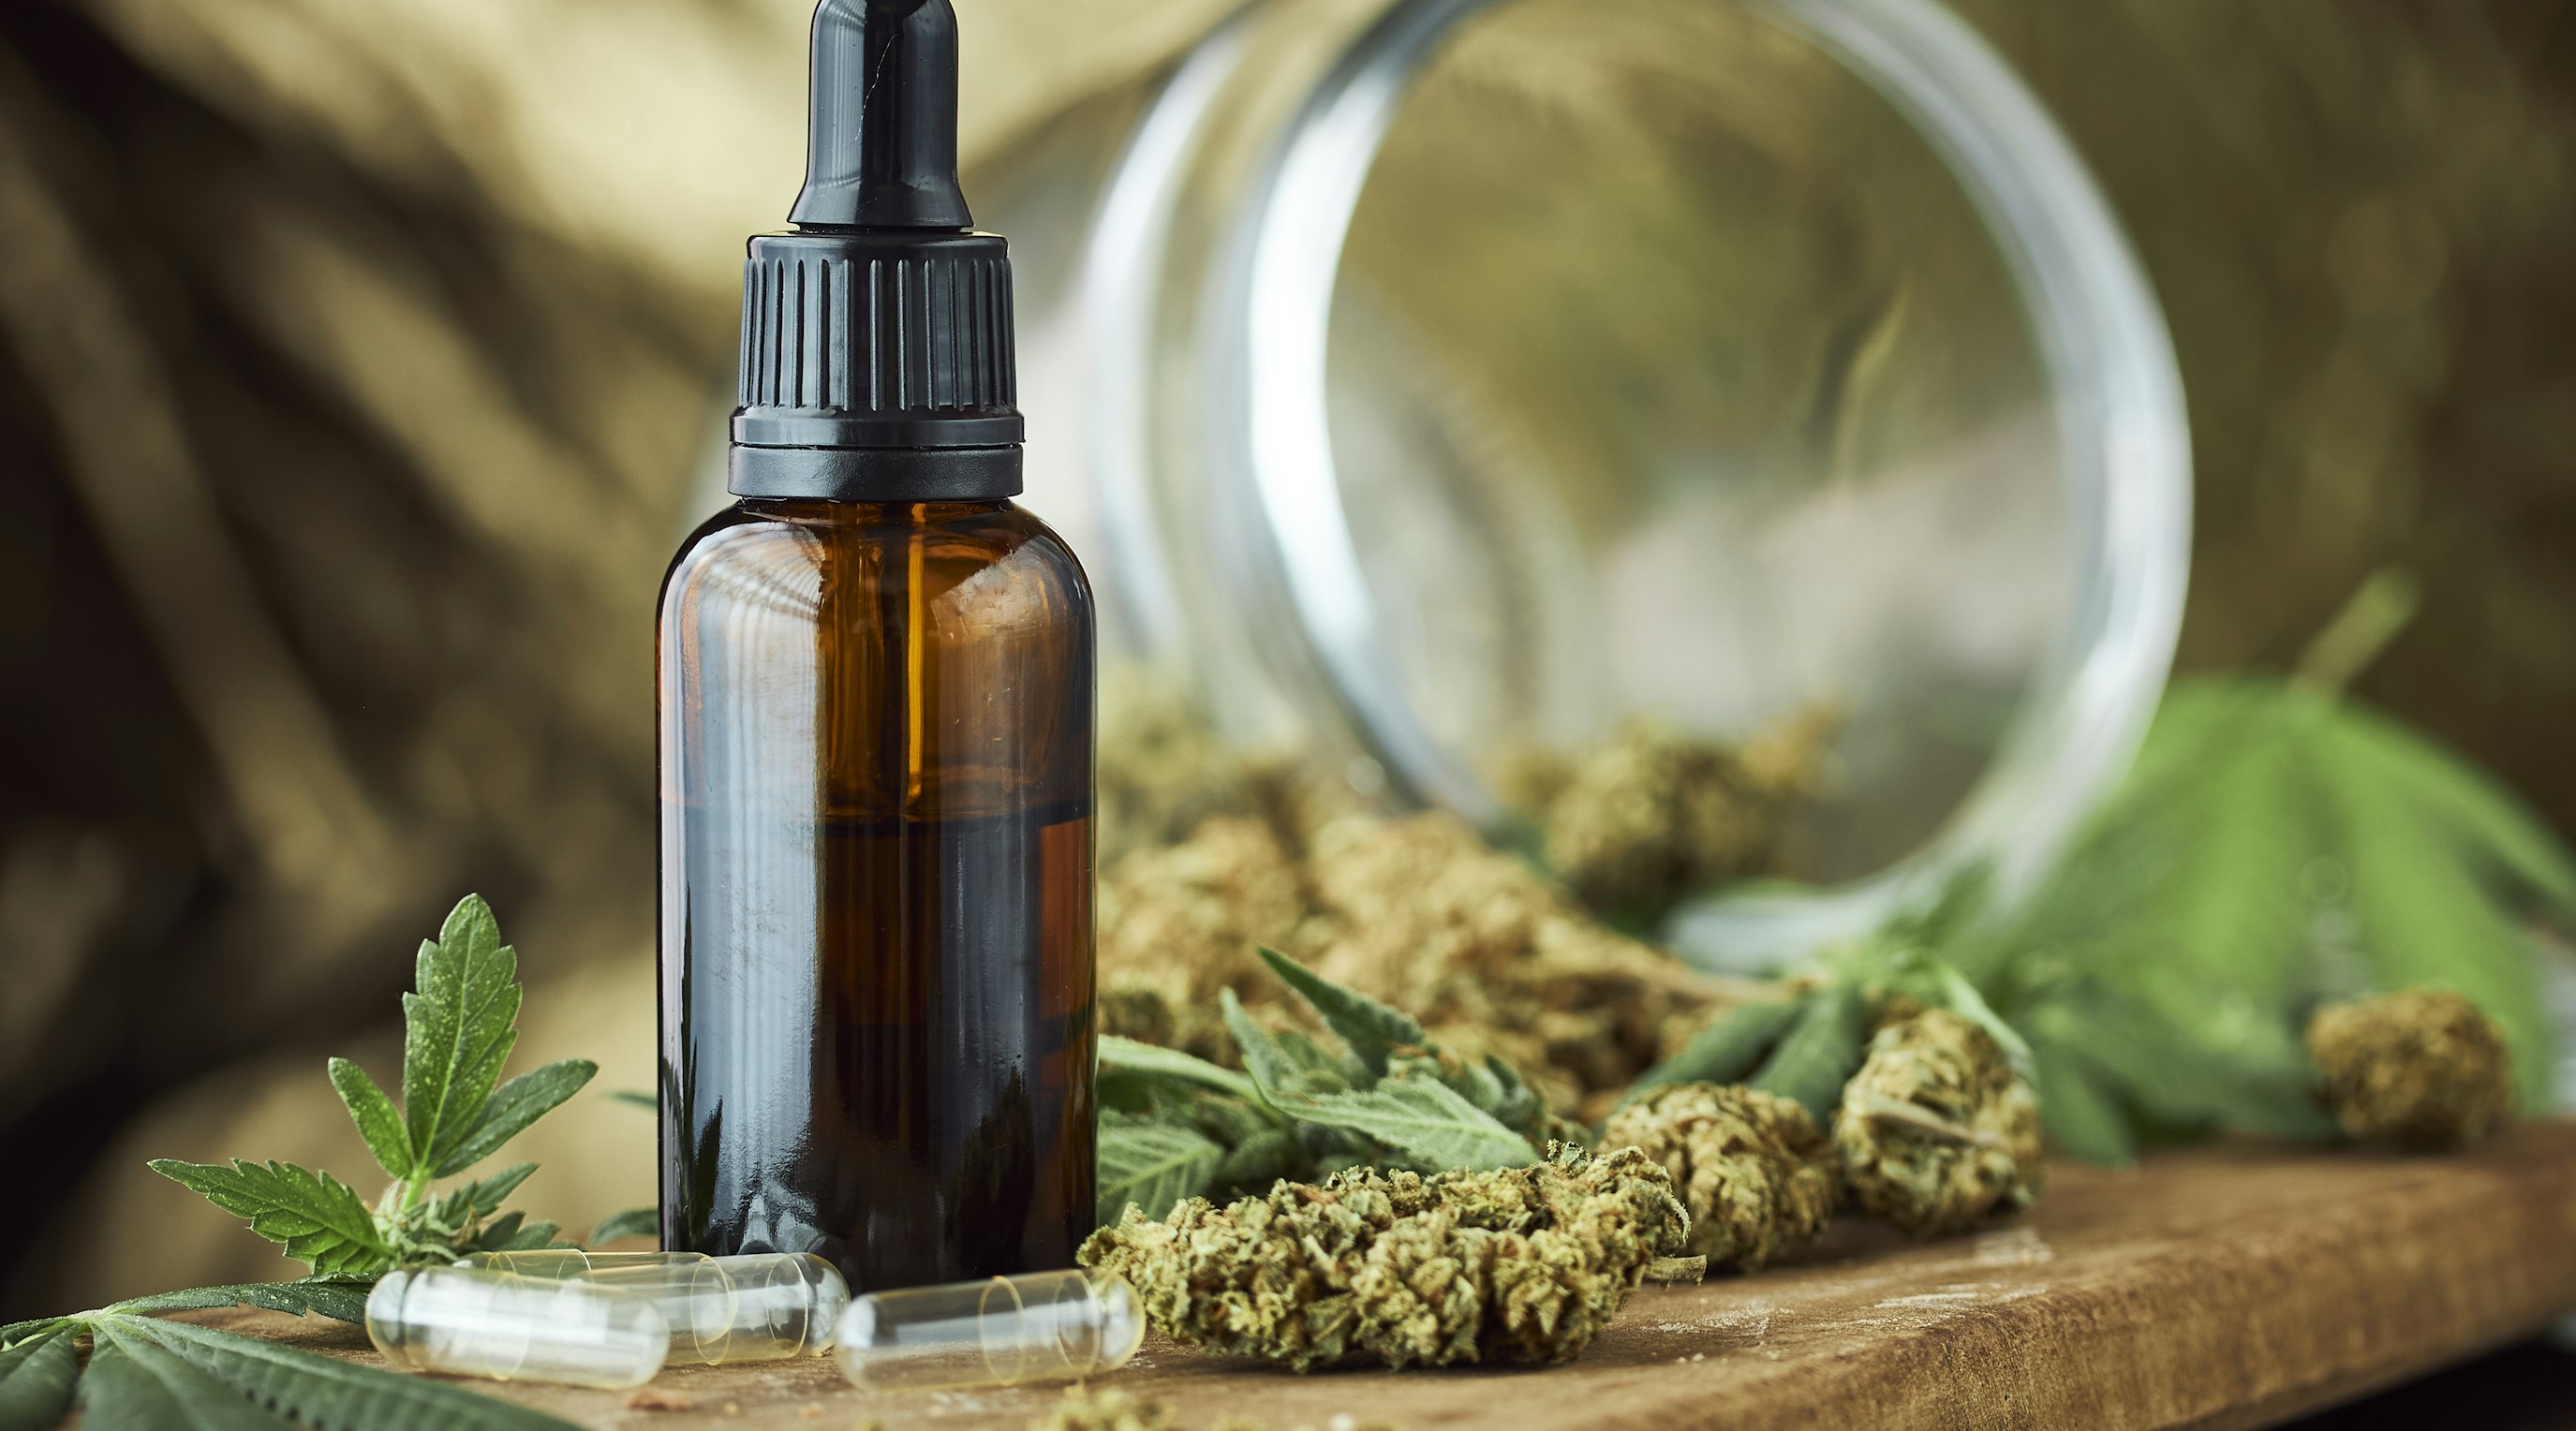 What role do terpenes play in CBD oil?